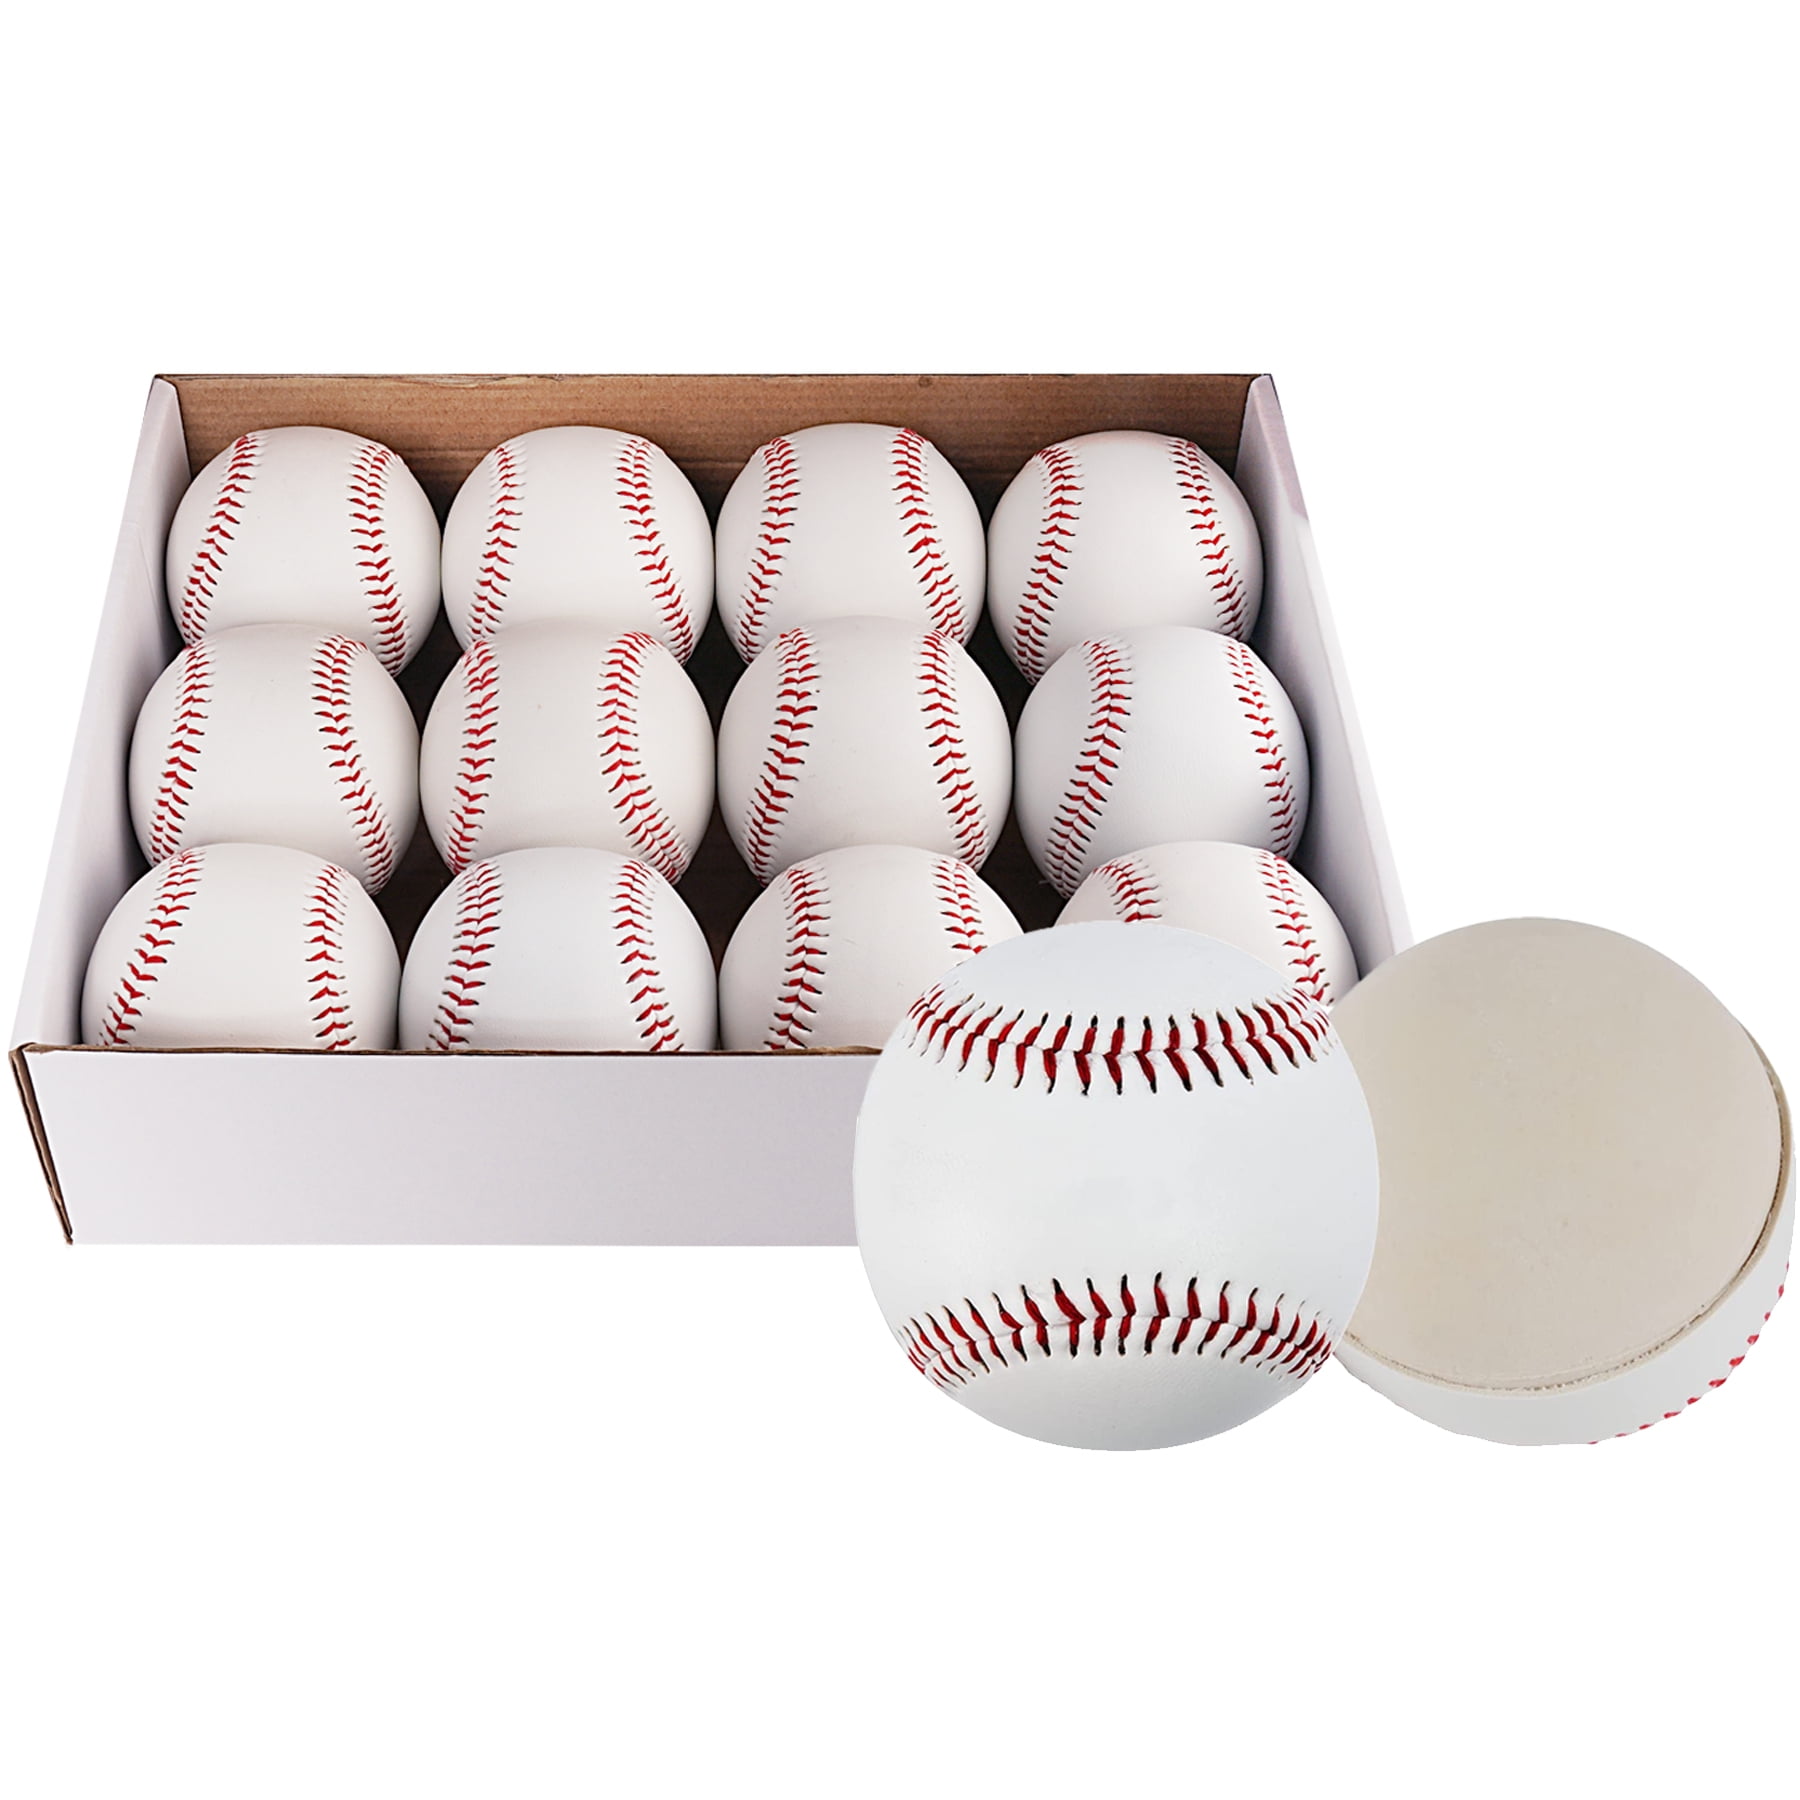 12pack Baseball Foam Softball 9inch Adult Youth Sporting Batting Ball For  Game Pitching Catching